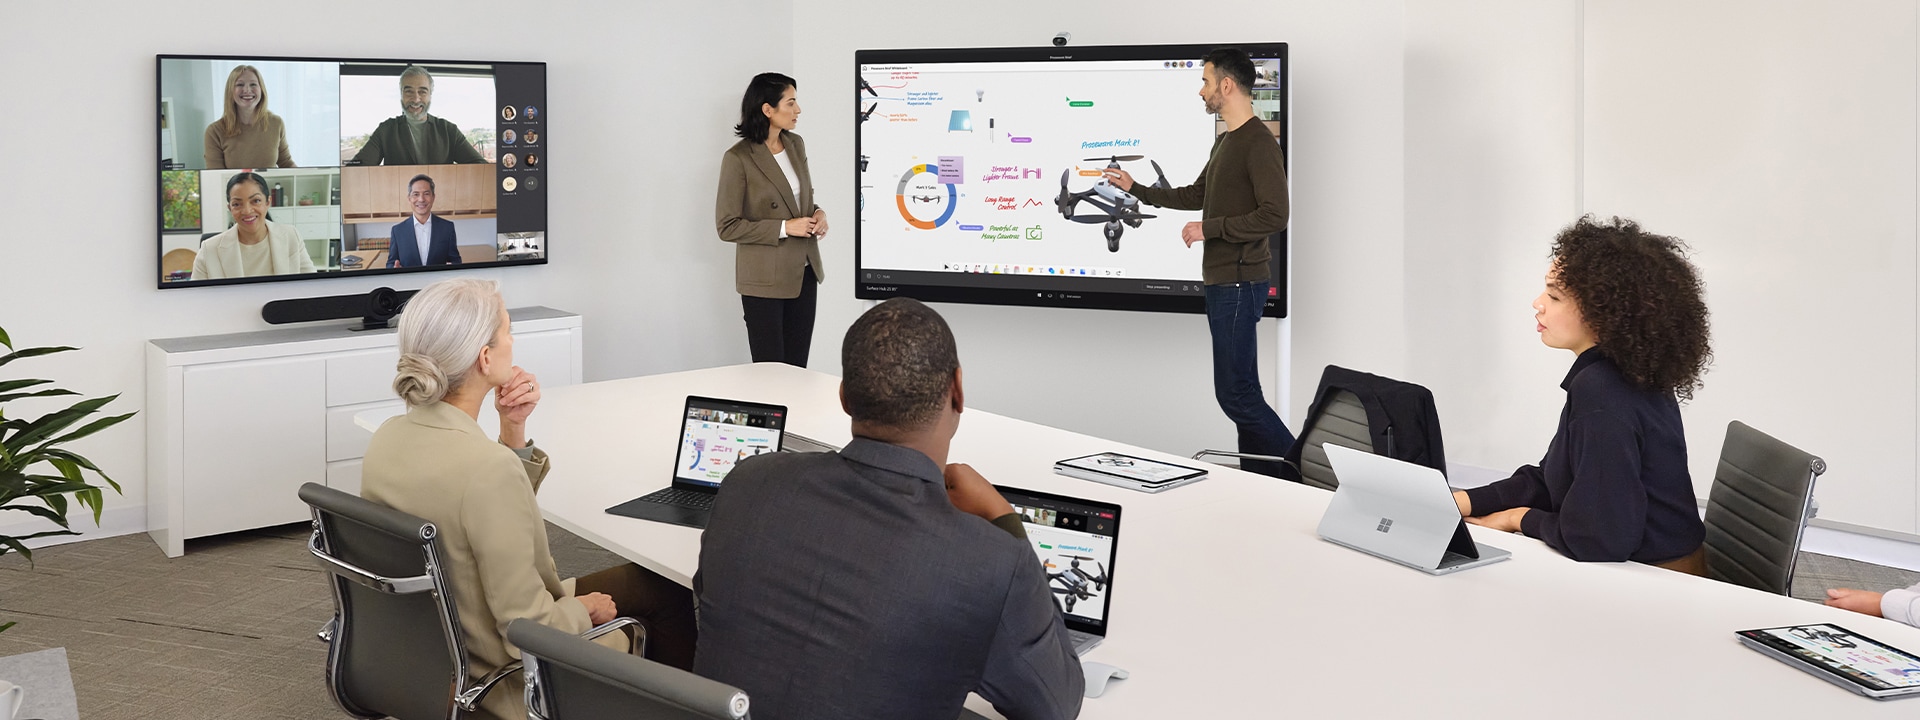 Two co-workers collaborate using Surface Hub 2S while also leading a virtual Teams meeting on a Surface Laptop on a nearby desk